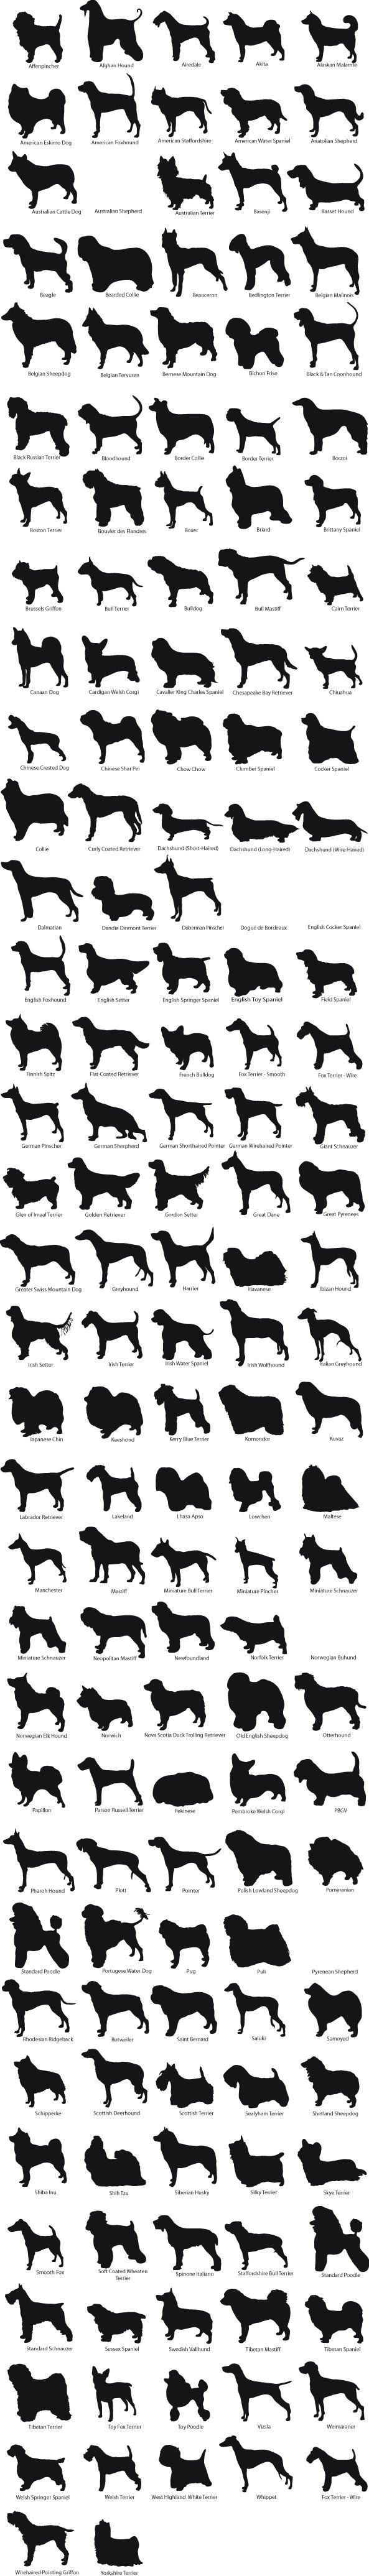 All Dog Breeds With Pictures And Information